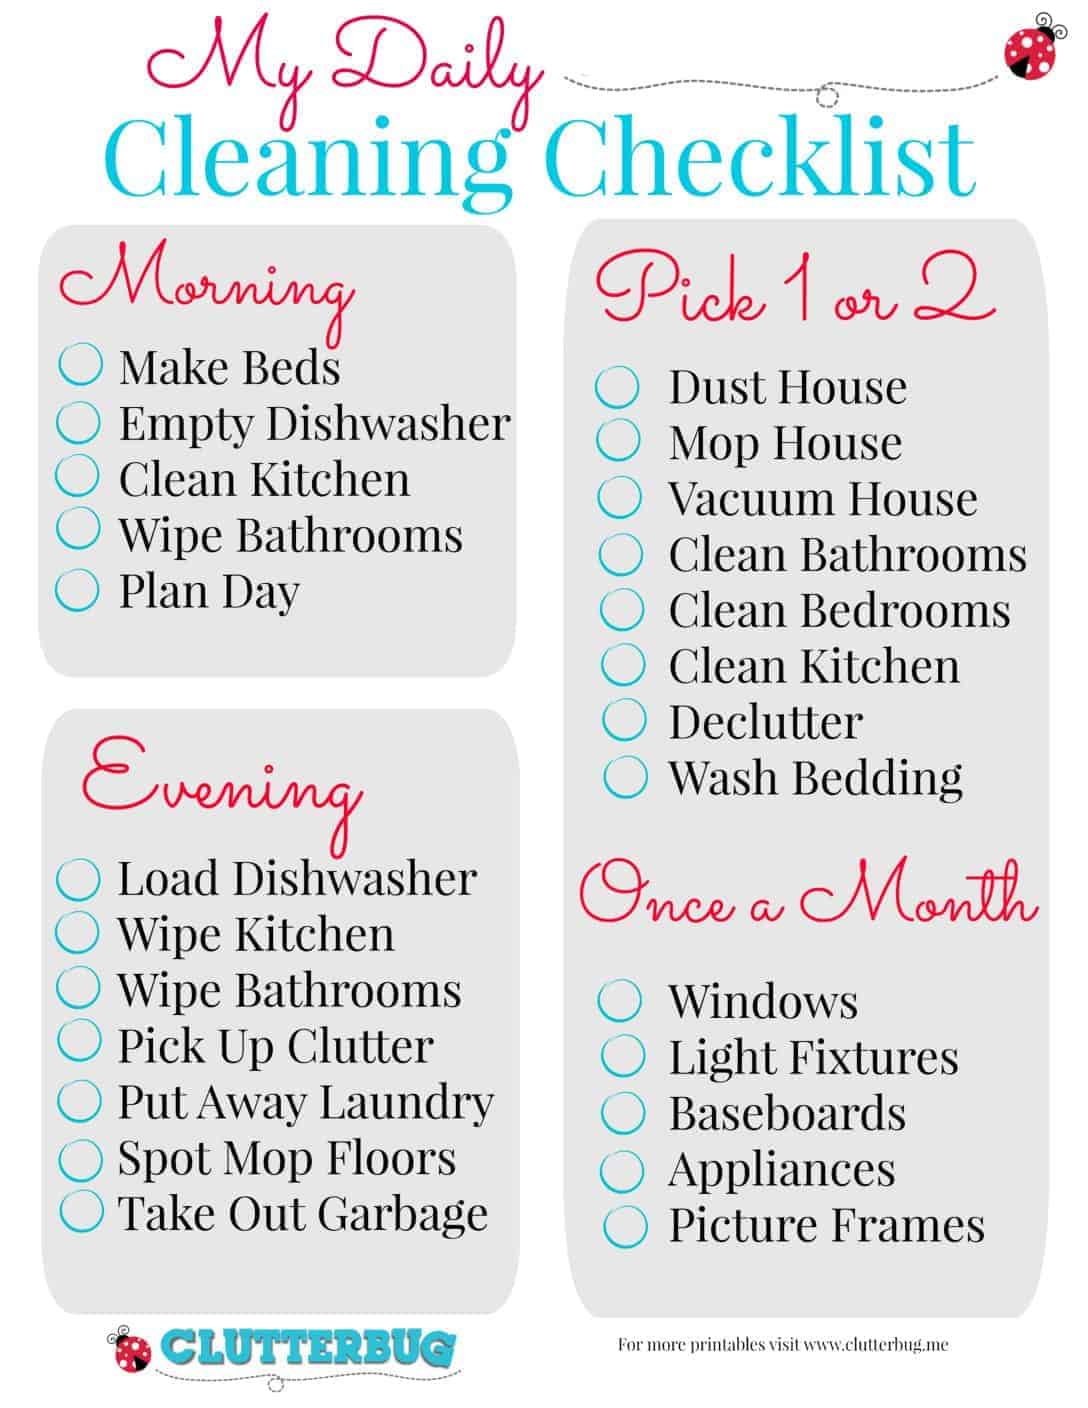 my-daily-cleaning-checklist-clutterbug